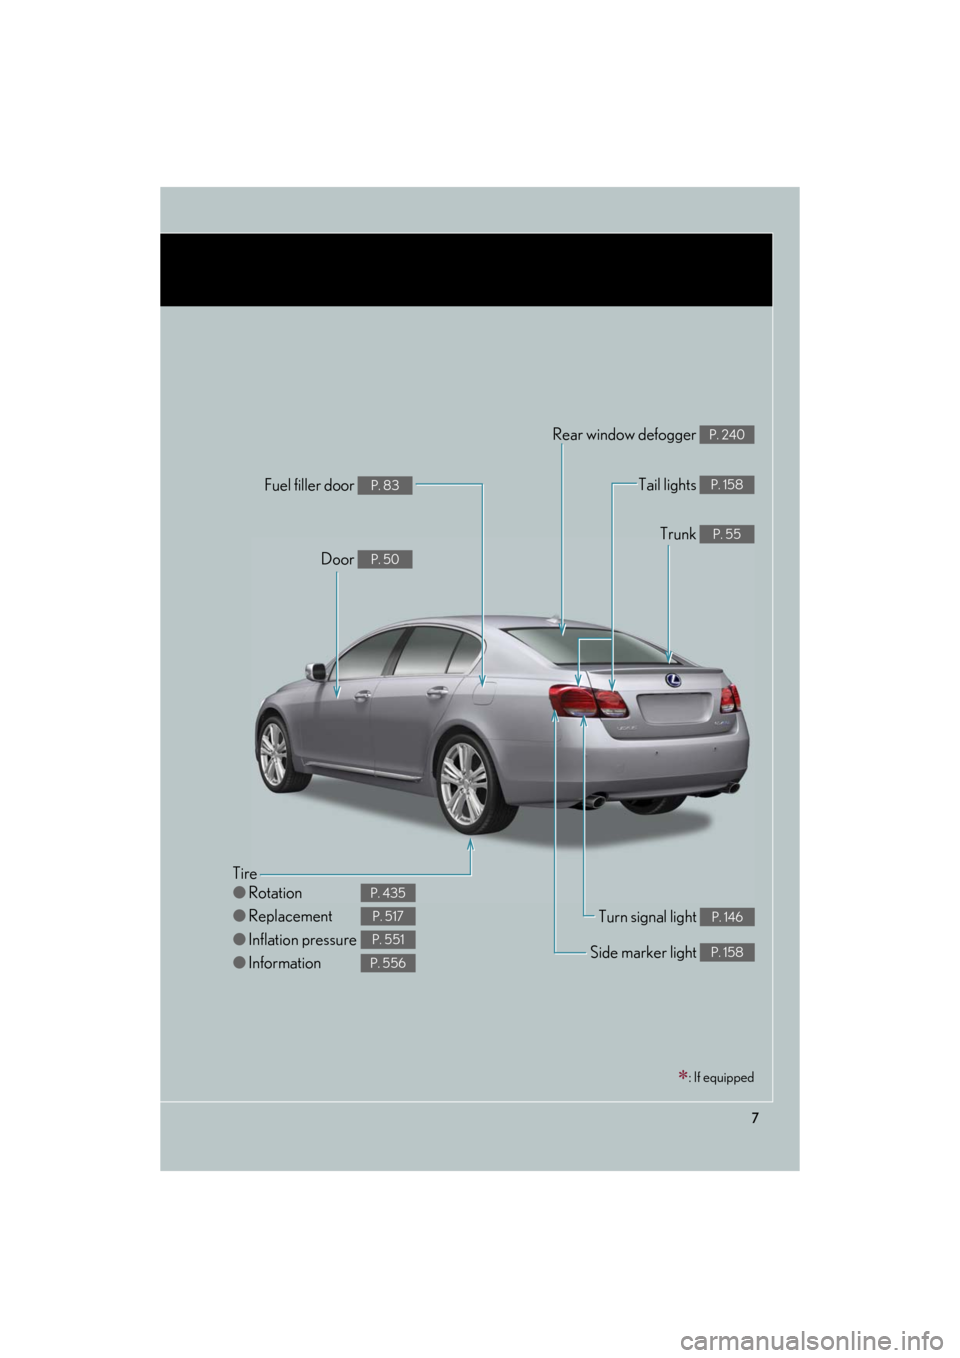 Lexus GS450h 2008  Scheduled Maintenace Guide / LEXUS 2008 GS450H OWNERS MANUAL (OM30A96U) 7
GS_HV_U
December 12, 2007 3:50 pm
Tire
●Rotation
● Replacement
● Inflation pressure
● Information
P. 435
P. 517
P. 551
P. 556
Tail lights P. 158
Side marker light P. 158
Trunk P. 55
Rear win